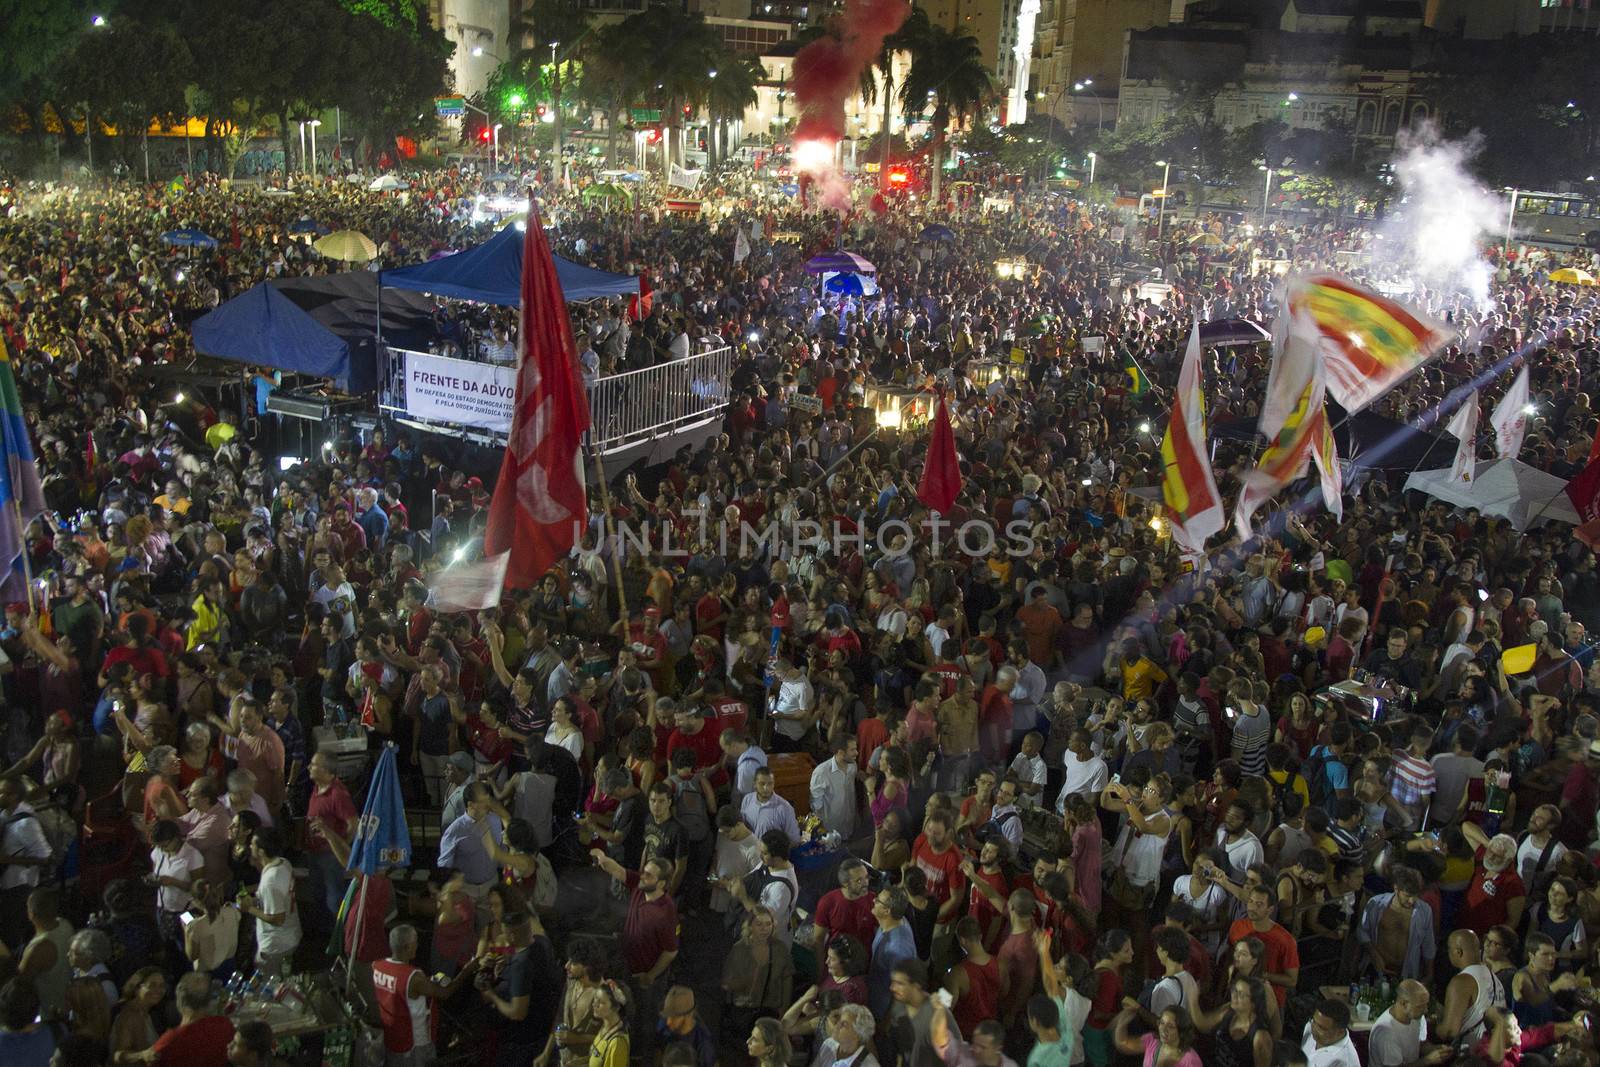 BRAZIL, Rio de Janeiro: People watch former President Luiz Inacio Lula da Silva (C), 'Lula', speak at a rally supporting President Dilma Rousseff in the historic Lapa neighborhood on April 11, 2016 in Rio de Janeiro, Brazil. Brazil's congressional impeachment committee approved the motion to proceed with President Dilma Rousseff's impeachment process today. A full vote by the lower house of Congress on the impeachment is scheduled for Sunday to decide whether she will face trial. 